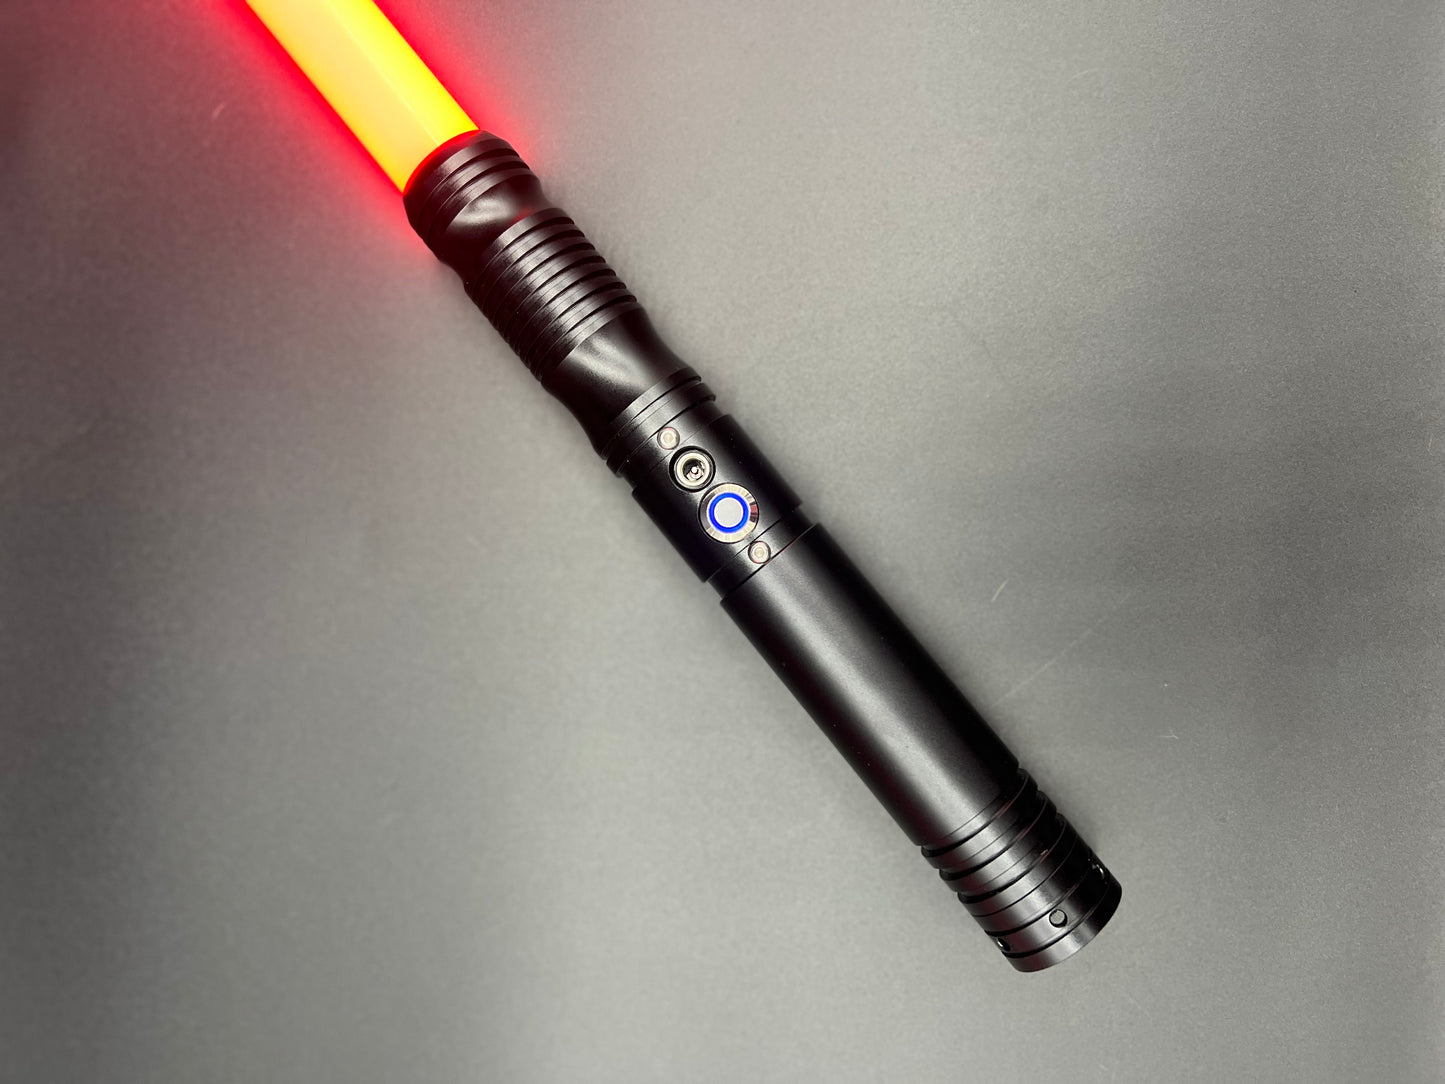 THE FORCE ECHO LIGHTSABER